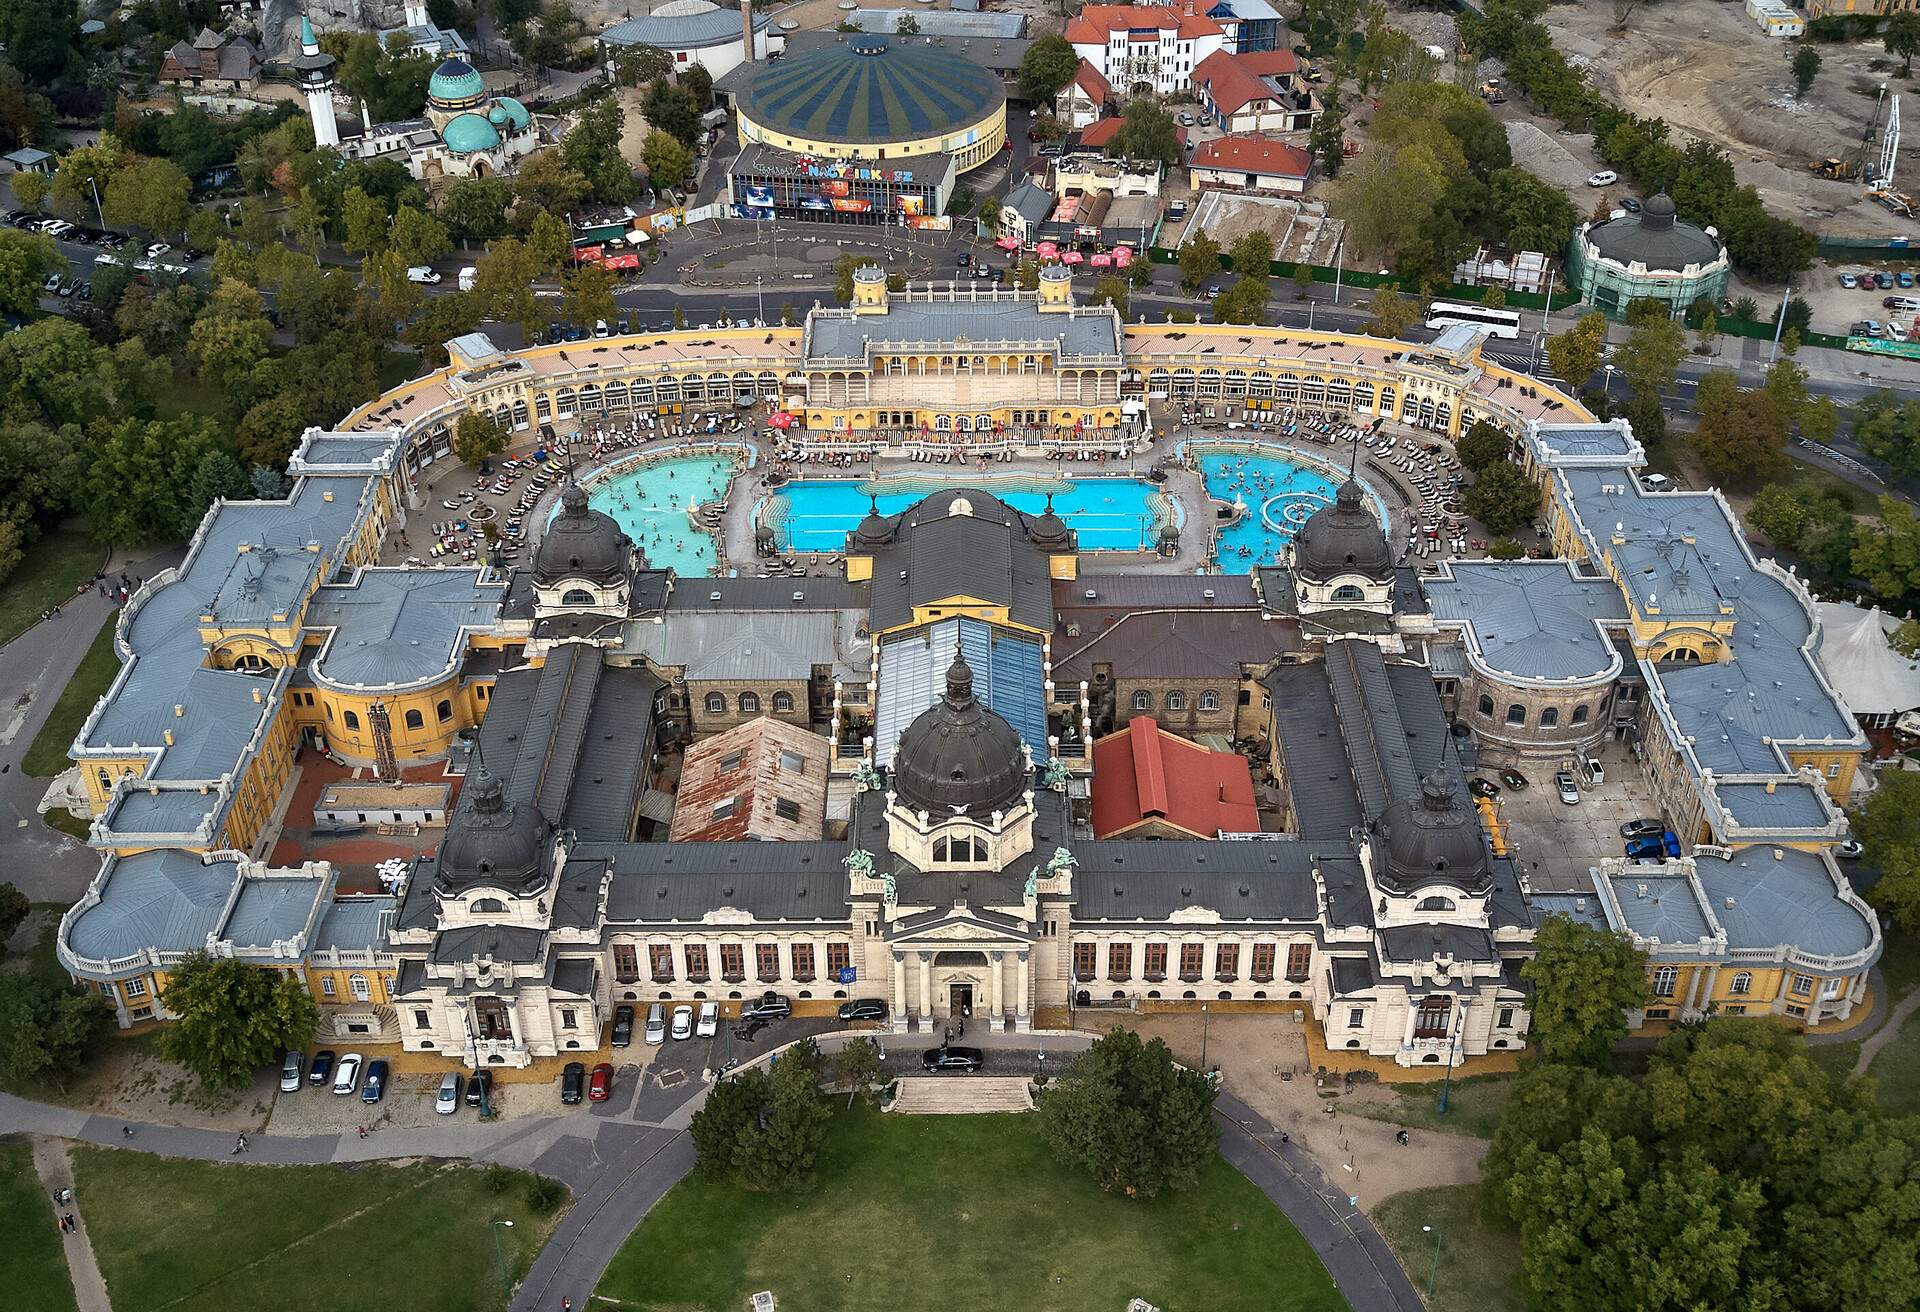 Szechenyi Baths in Budapest. aerial view of The biggest bath complex in Europe. Budapest, Hungary.